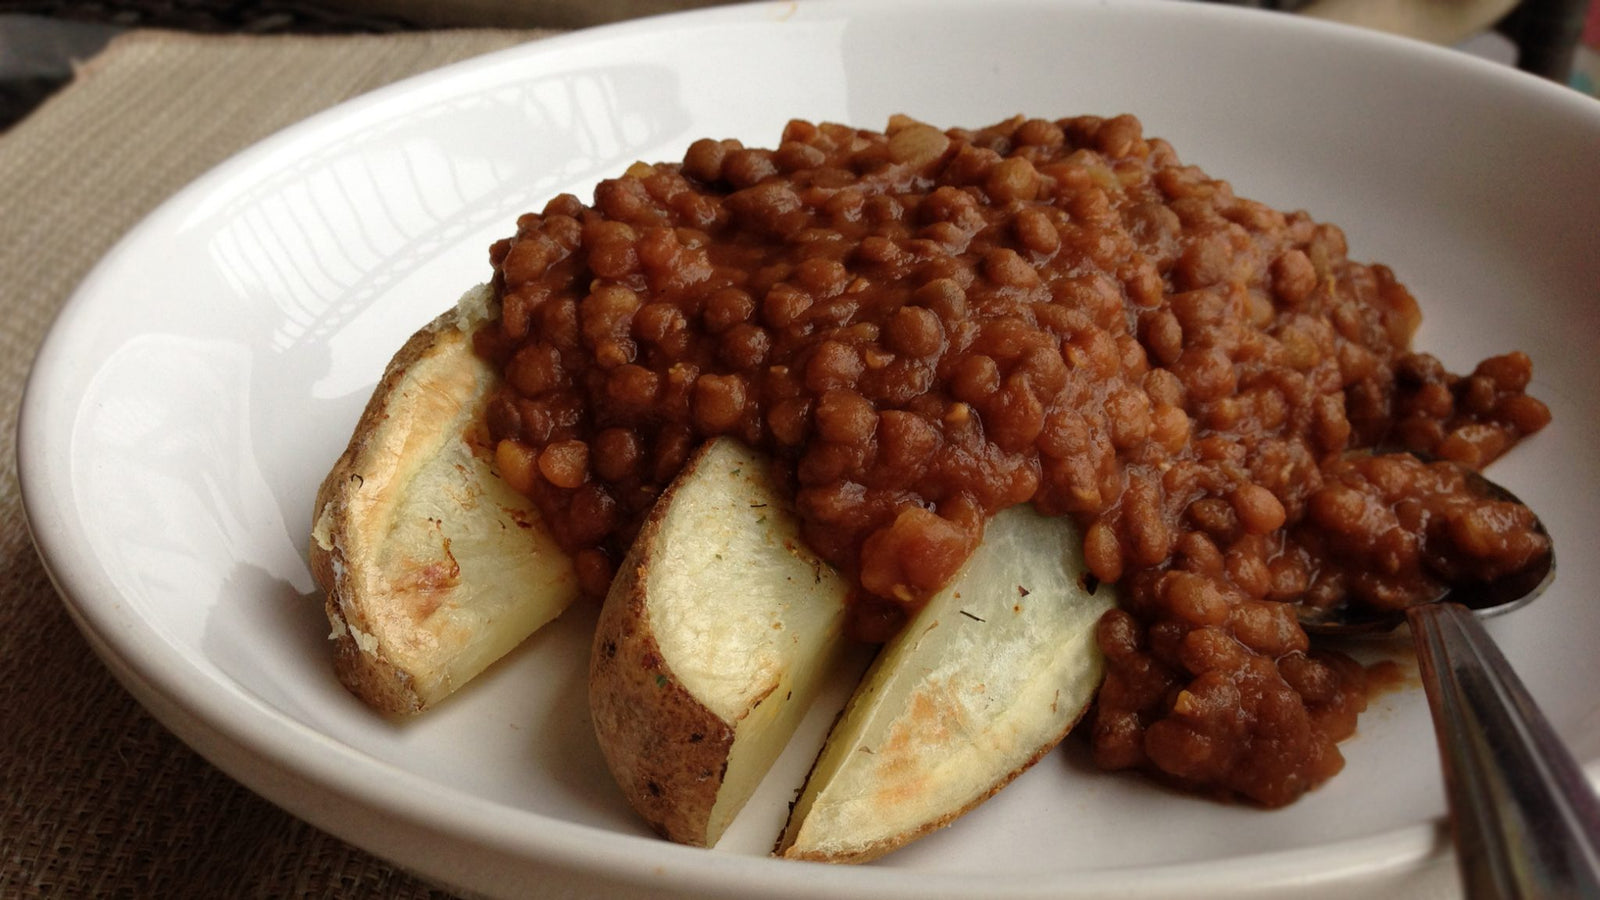 Barbecue Lentils over Baked Potato Wedges